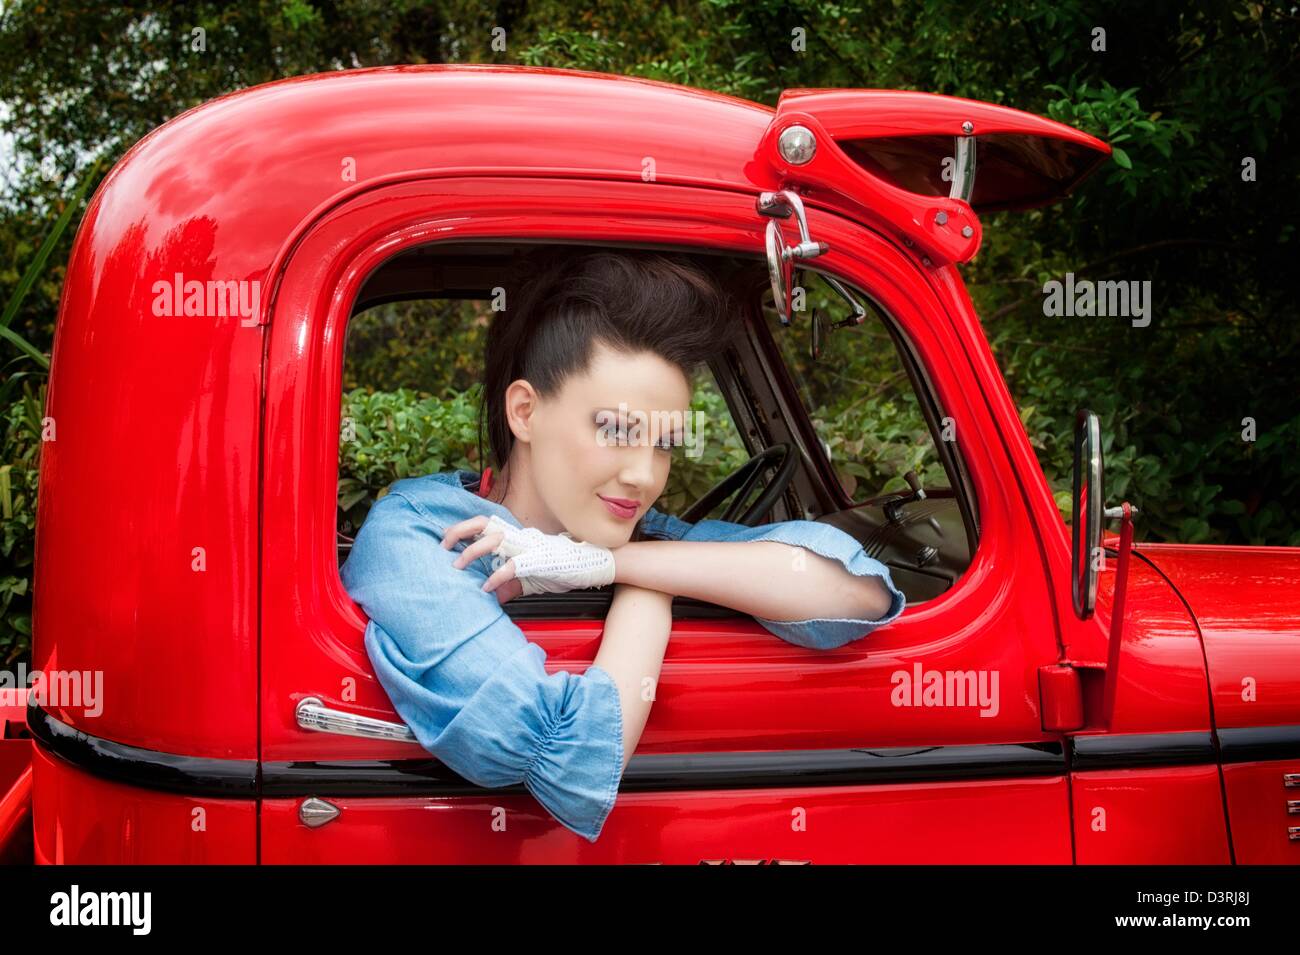 Young woman 30s sitting in red Chevy truck wearing blue denim shirt Stock Photo